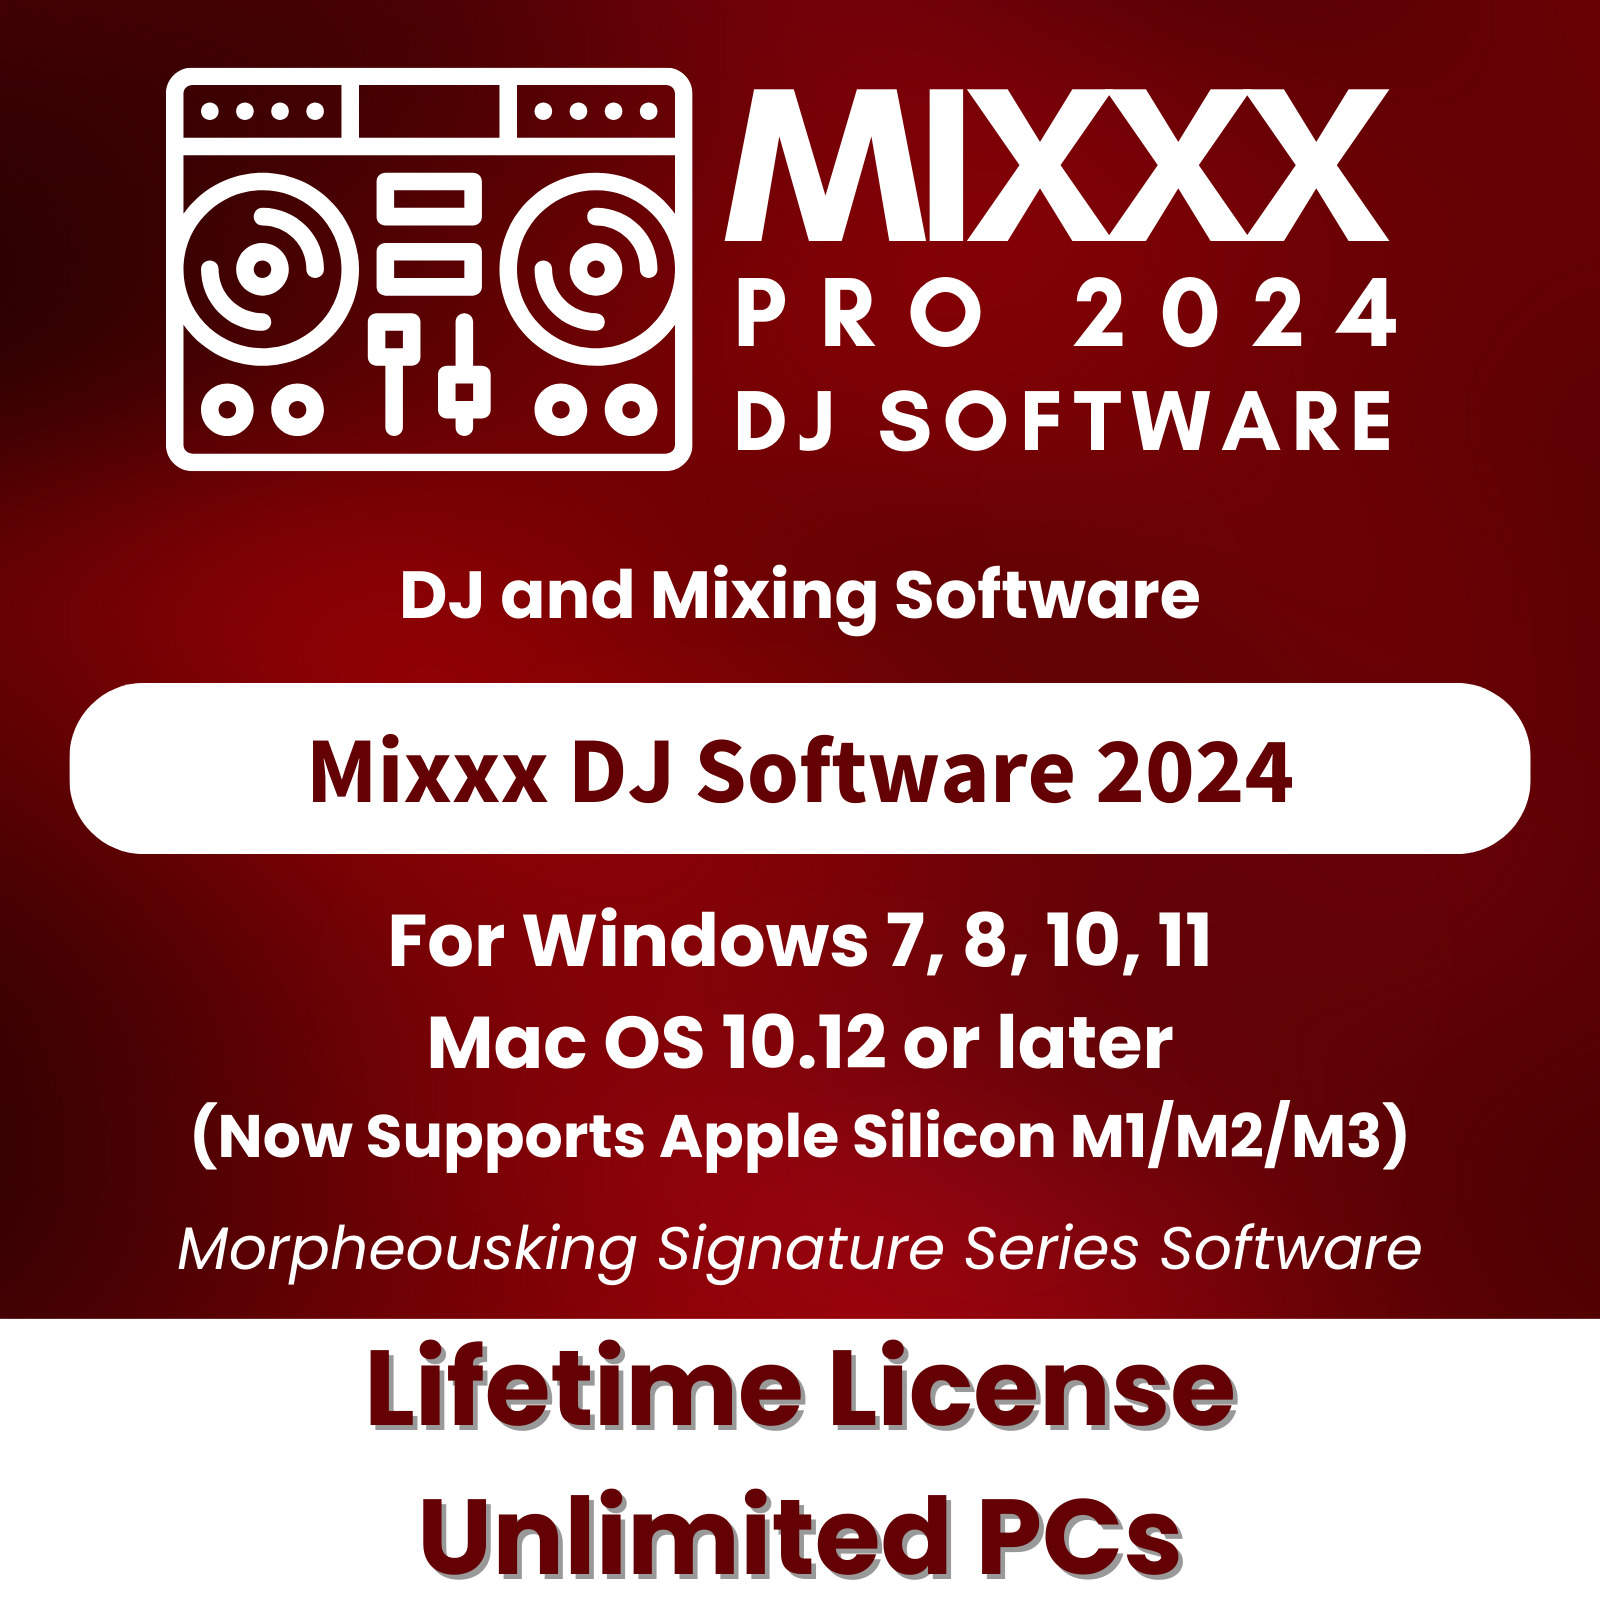 Mixxx PRO 2024 DJ Mixing Software | Controller Support | Record - Broadcast | CD